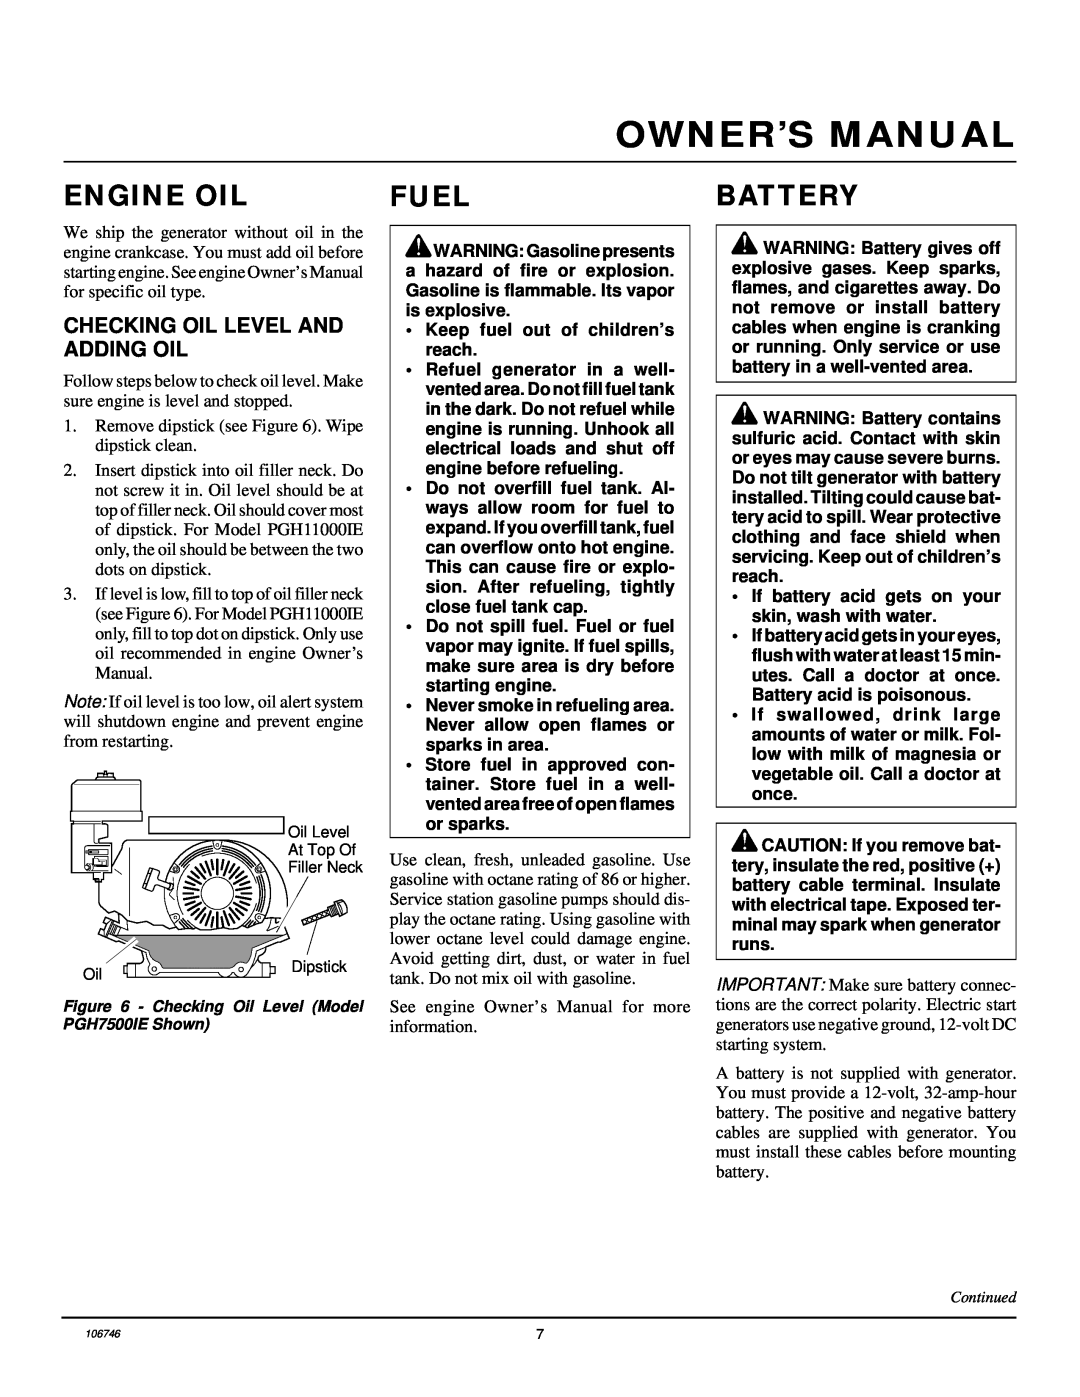 Desa PGH7500IE, PGH1100IE installation manual Engine Oil, Fuel, Battery, Checking Oil Level And Adding Oil 